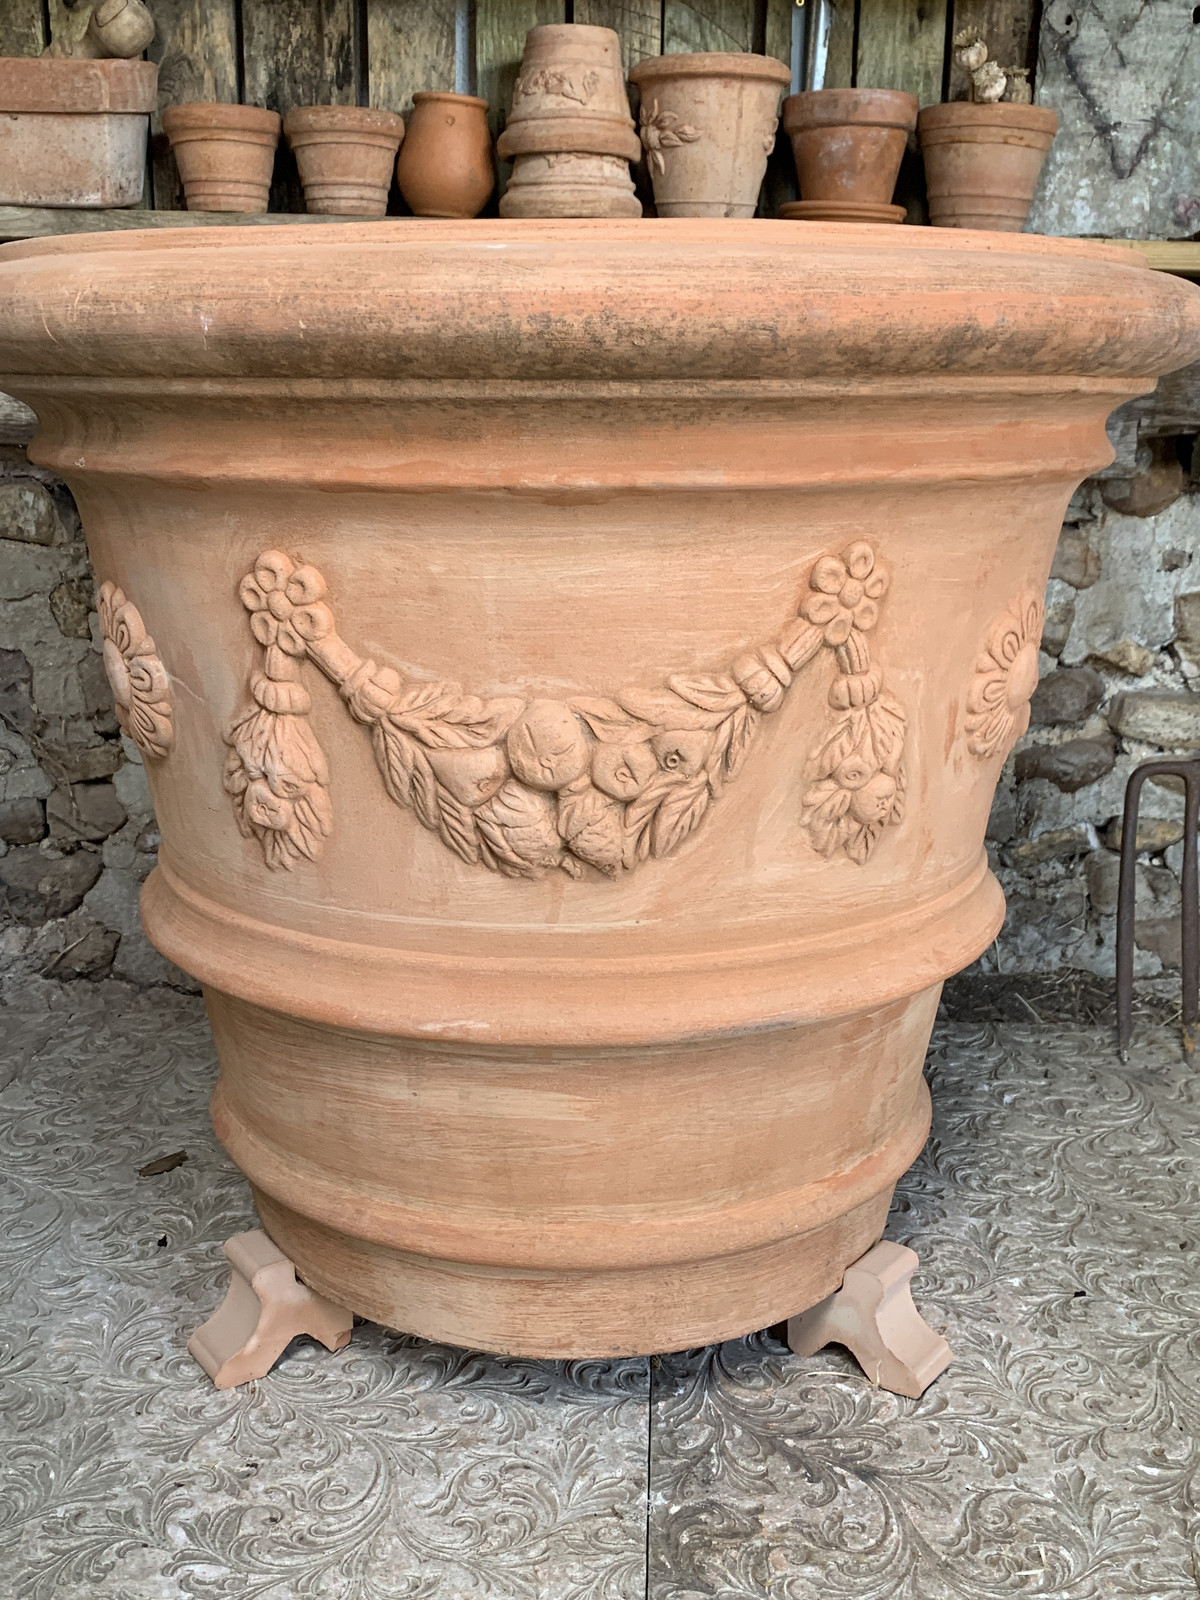 High Arch Pot Feet | Our Products | Mud Mountain - Hand Made Italian